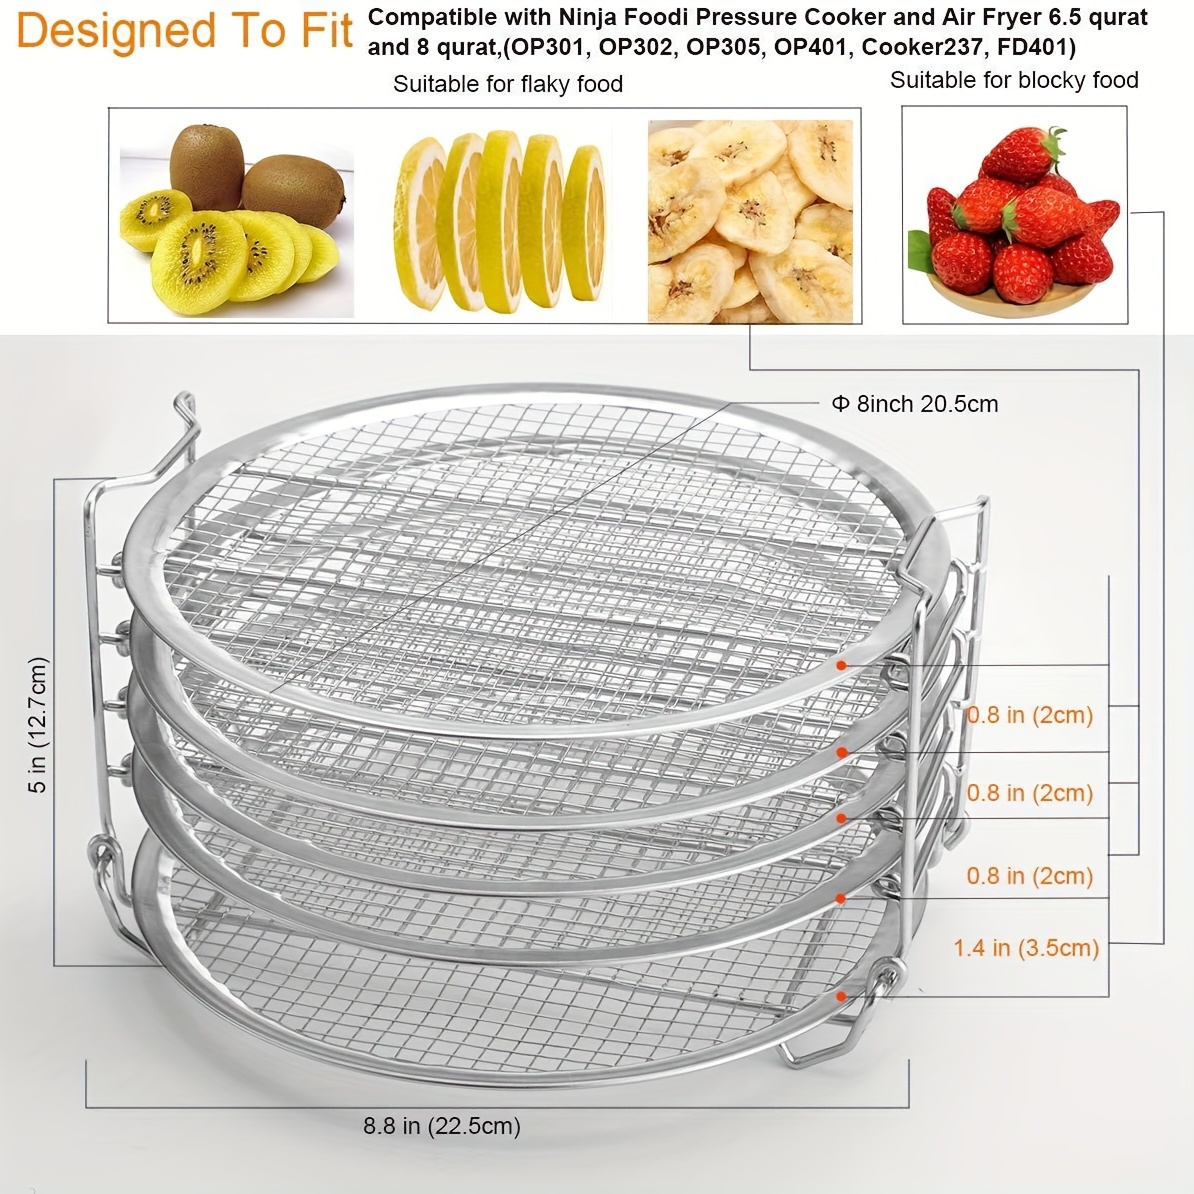 Dehydrator Rack For Ninja Foodi Accesories, Pressure Cooker and Air Fryer  6.5 Quart & 8 Quart - Stainless Steel Cooker Rack With Five Stackable Layers